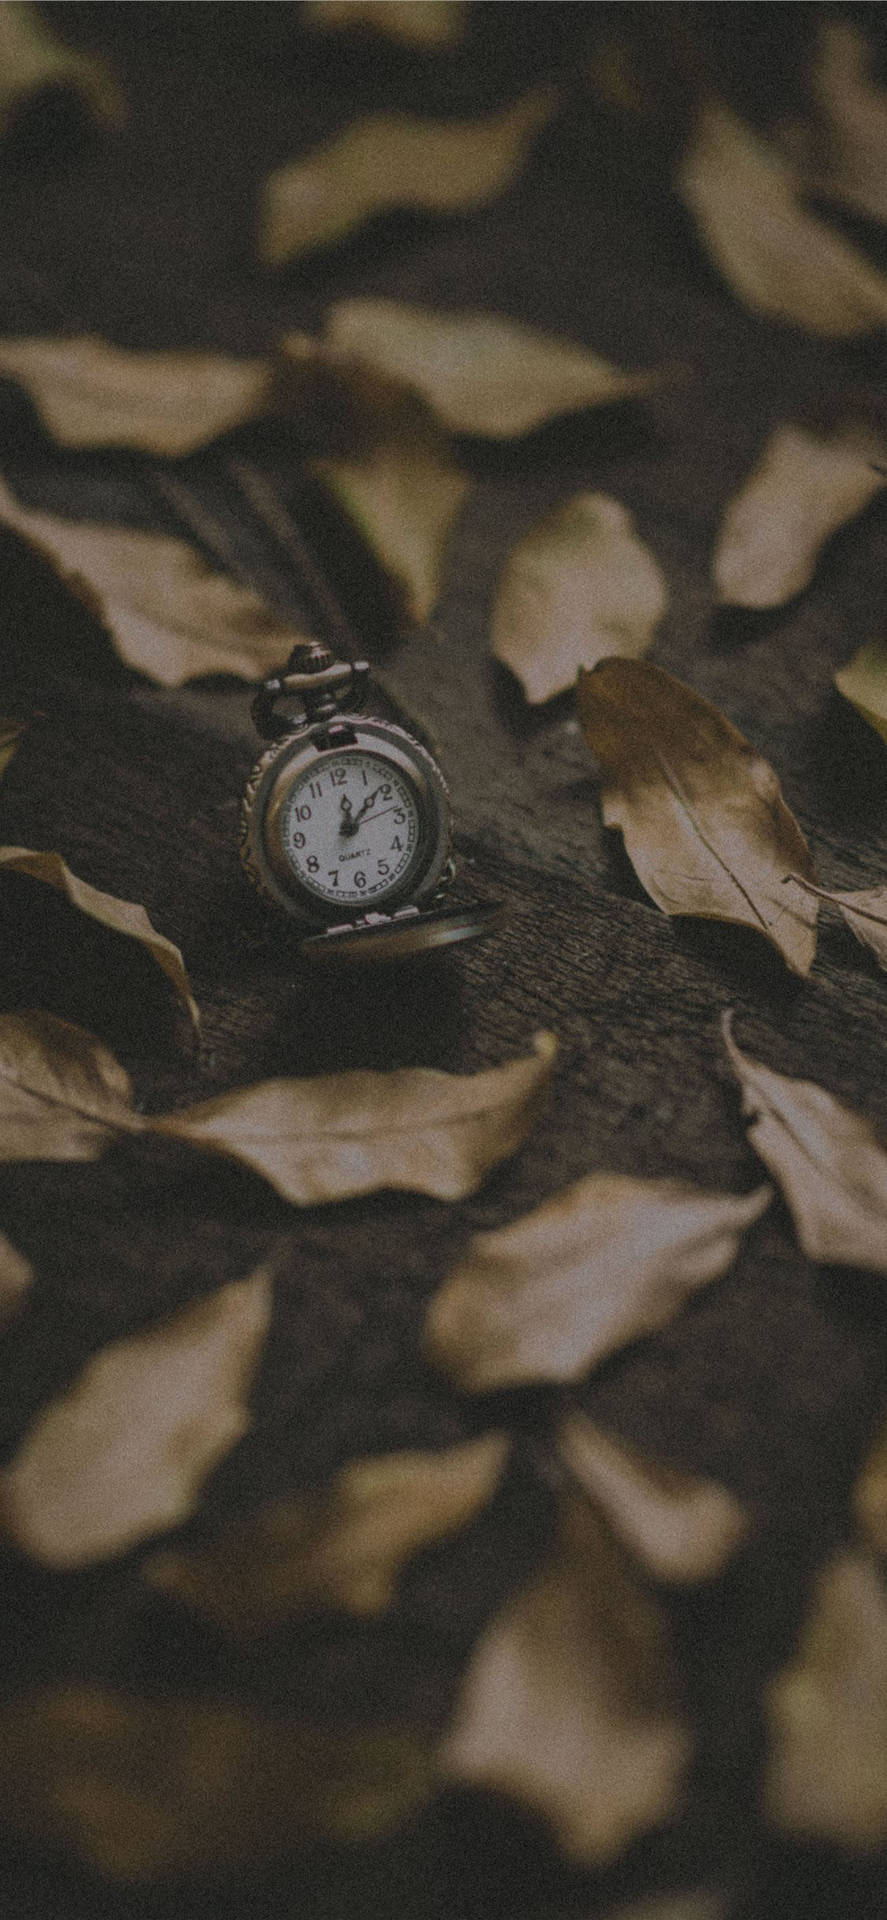 Autumn Iphone Foliage And Pocket Watch